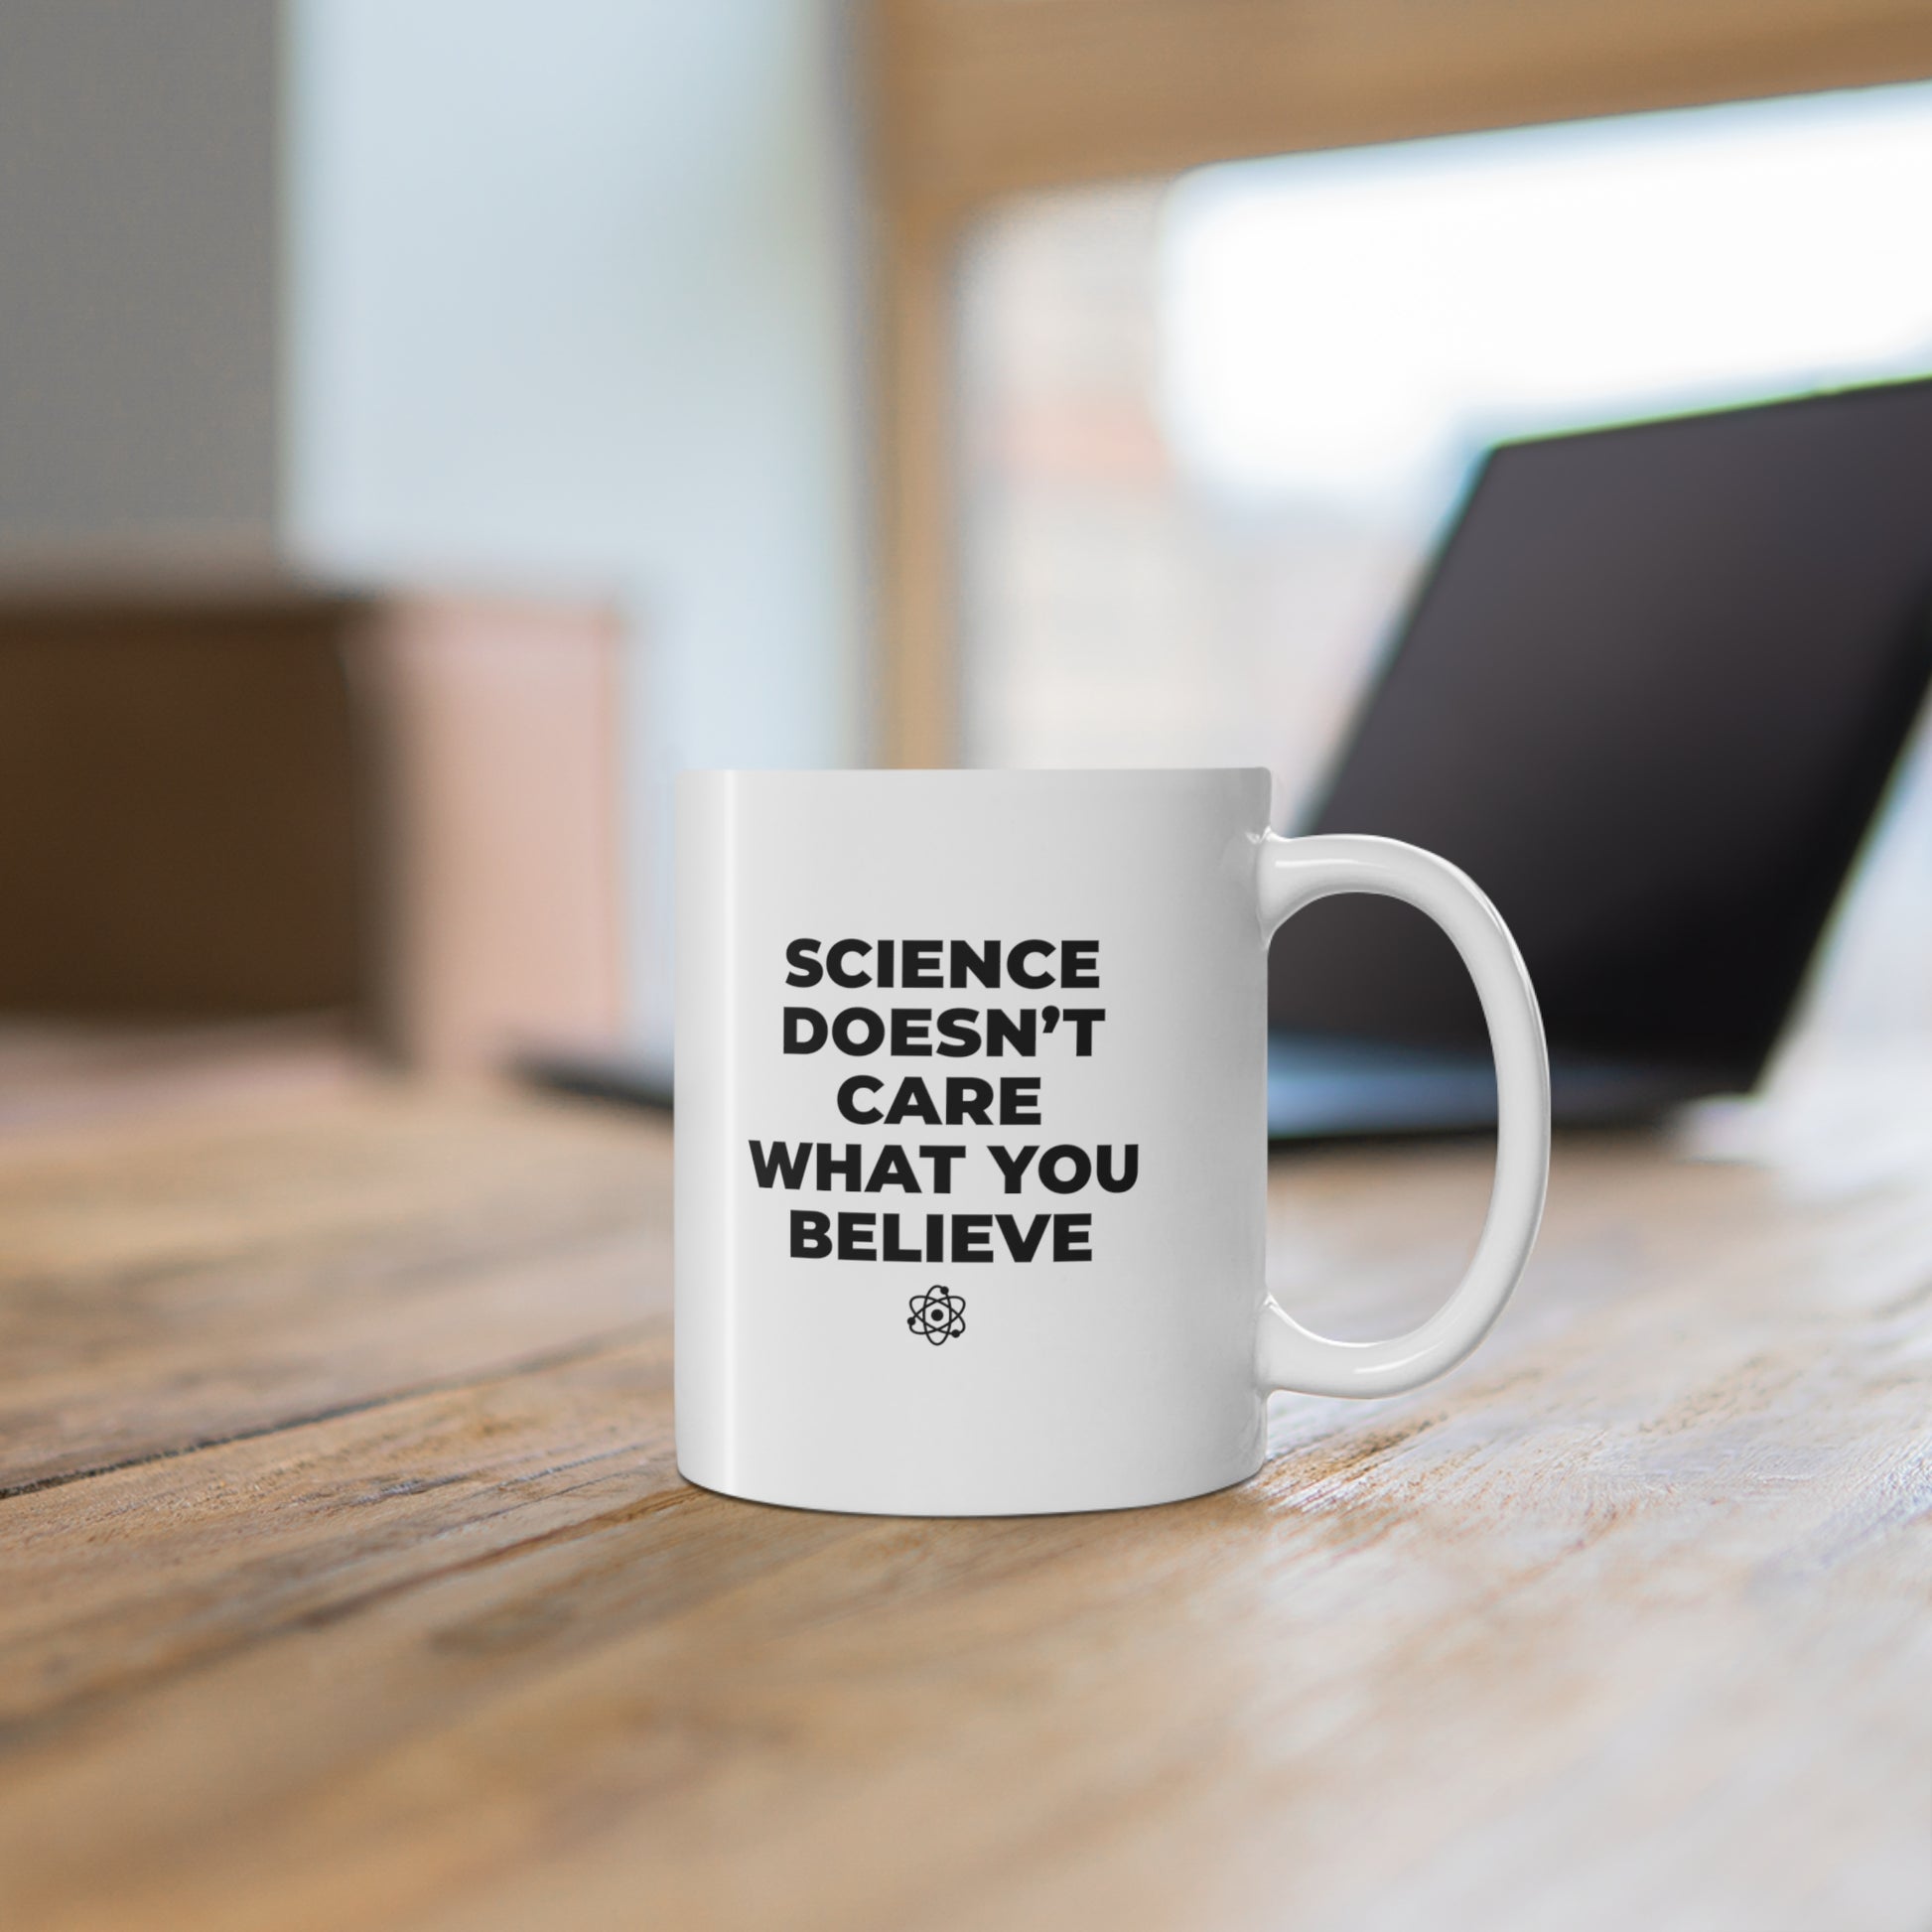 11oz ceramic mug with quote Science Doesn't Care What You Believe